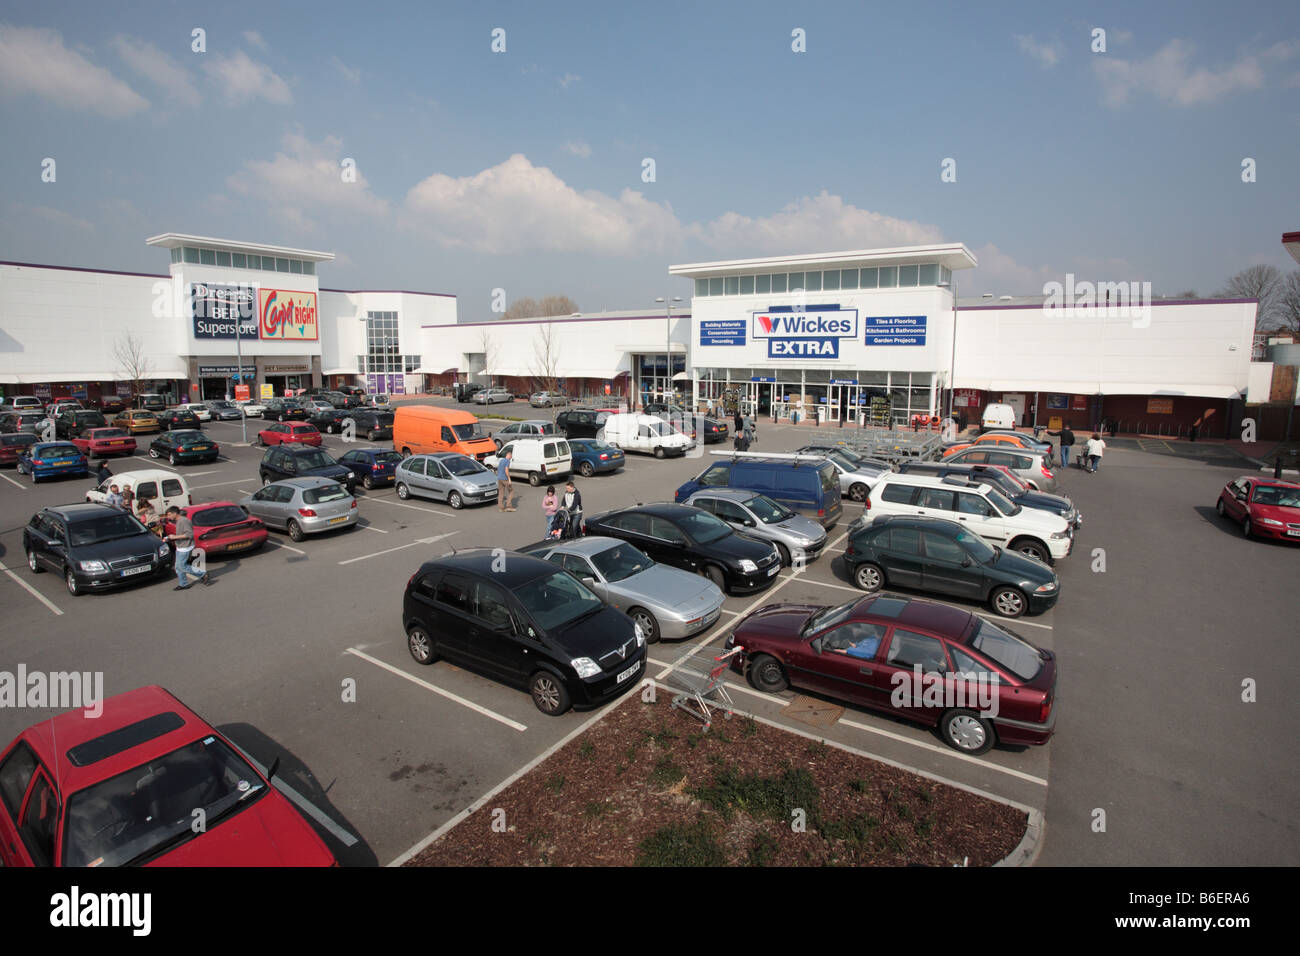 Wickes Extra, Cambridge Fermer Retail Park, Aylesbury Banque D'Images